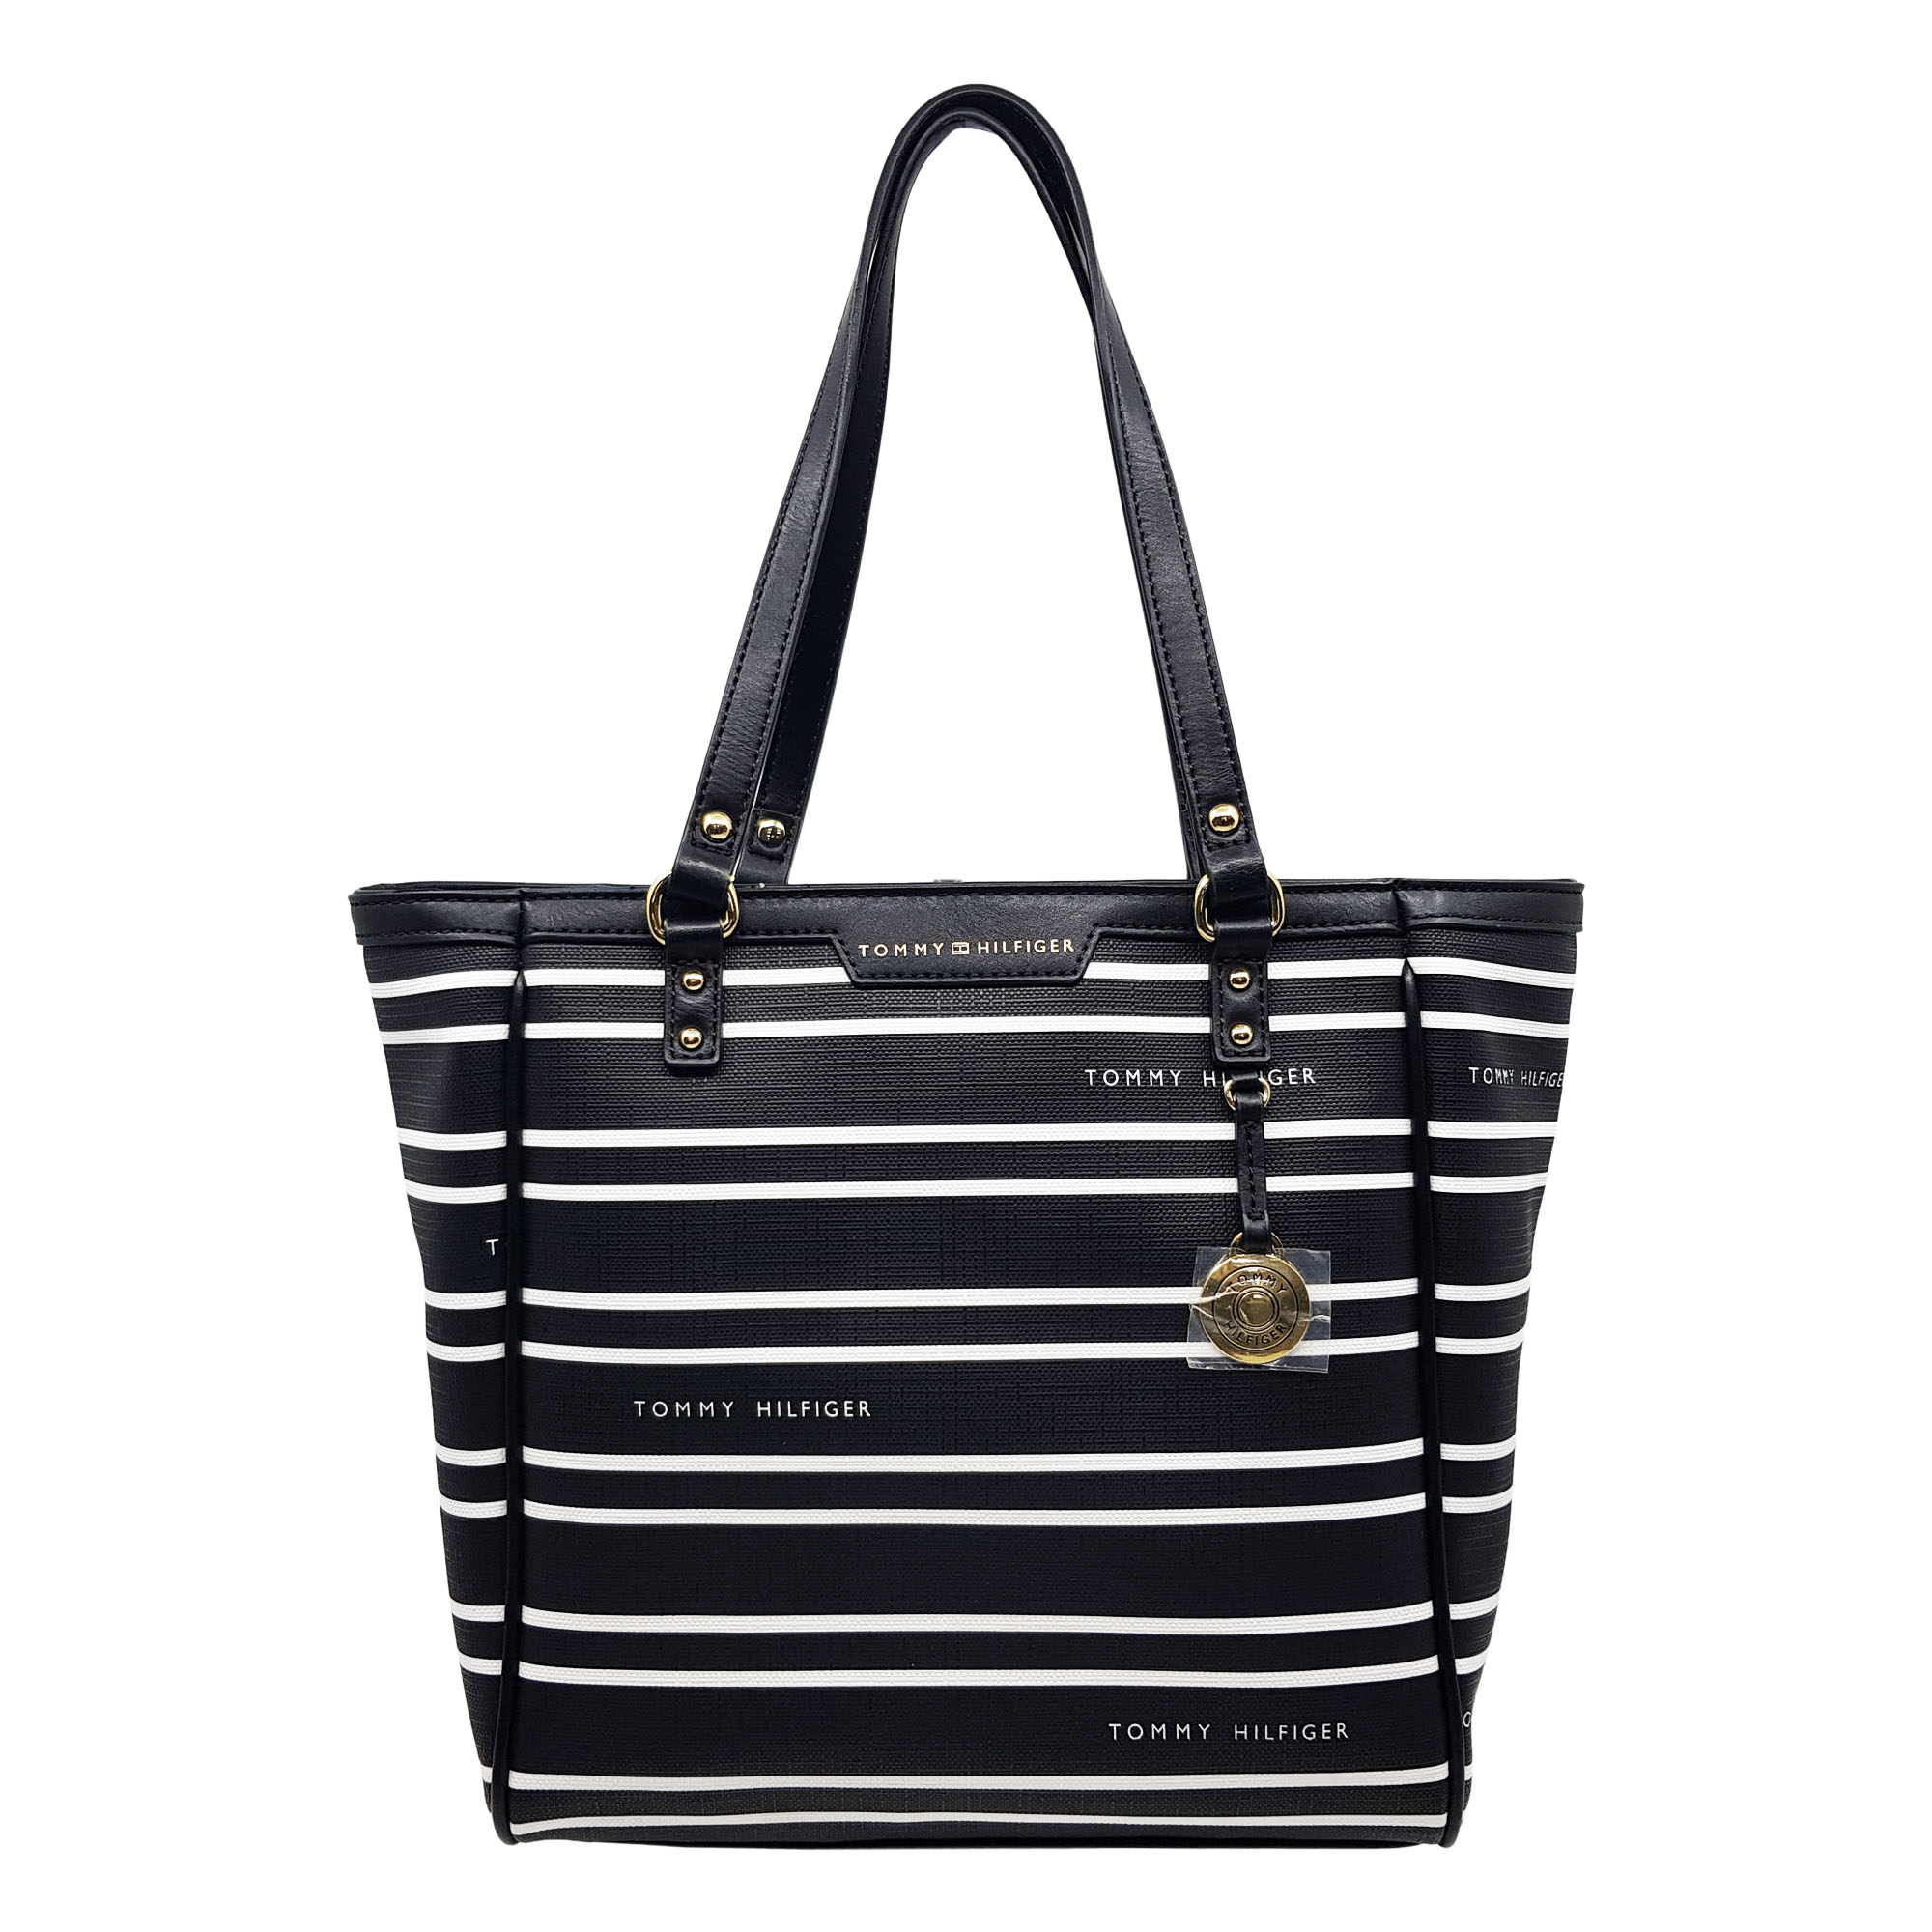 tommy hilfiger purse black and white